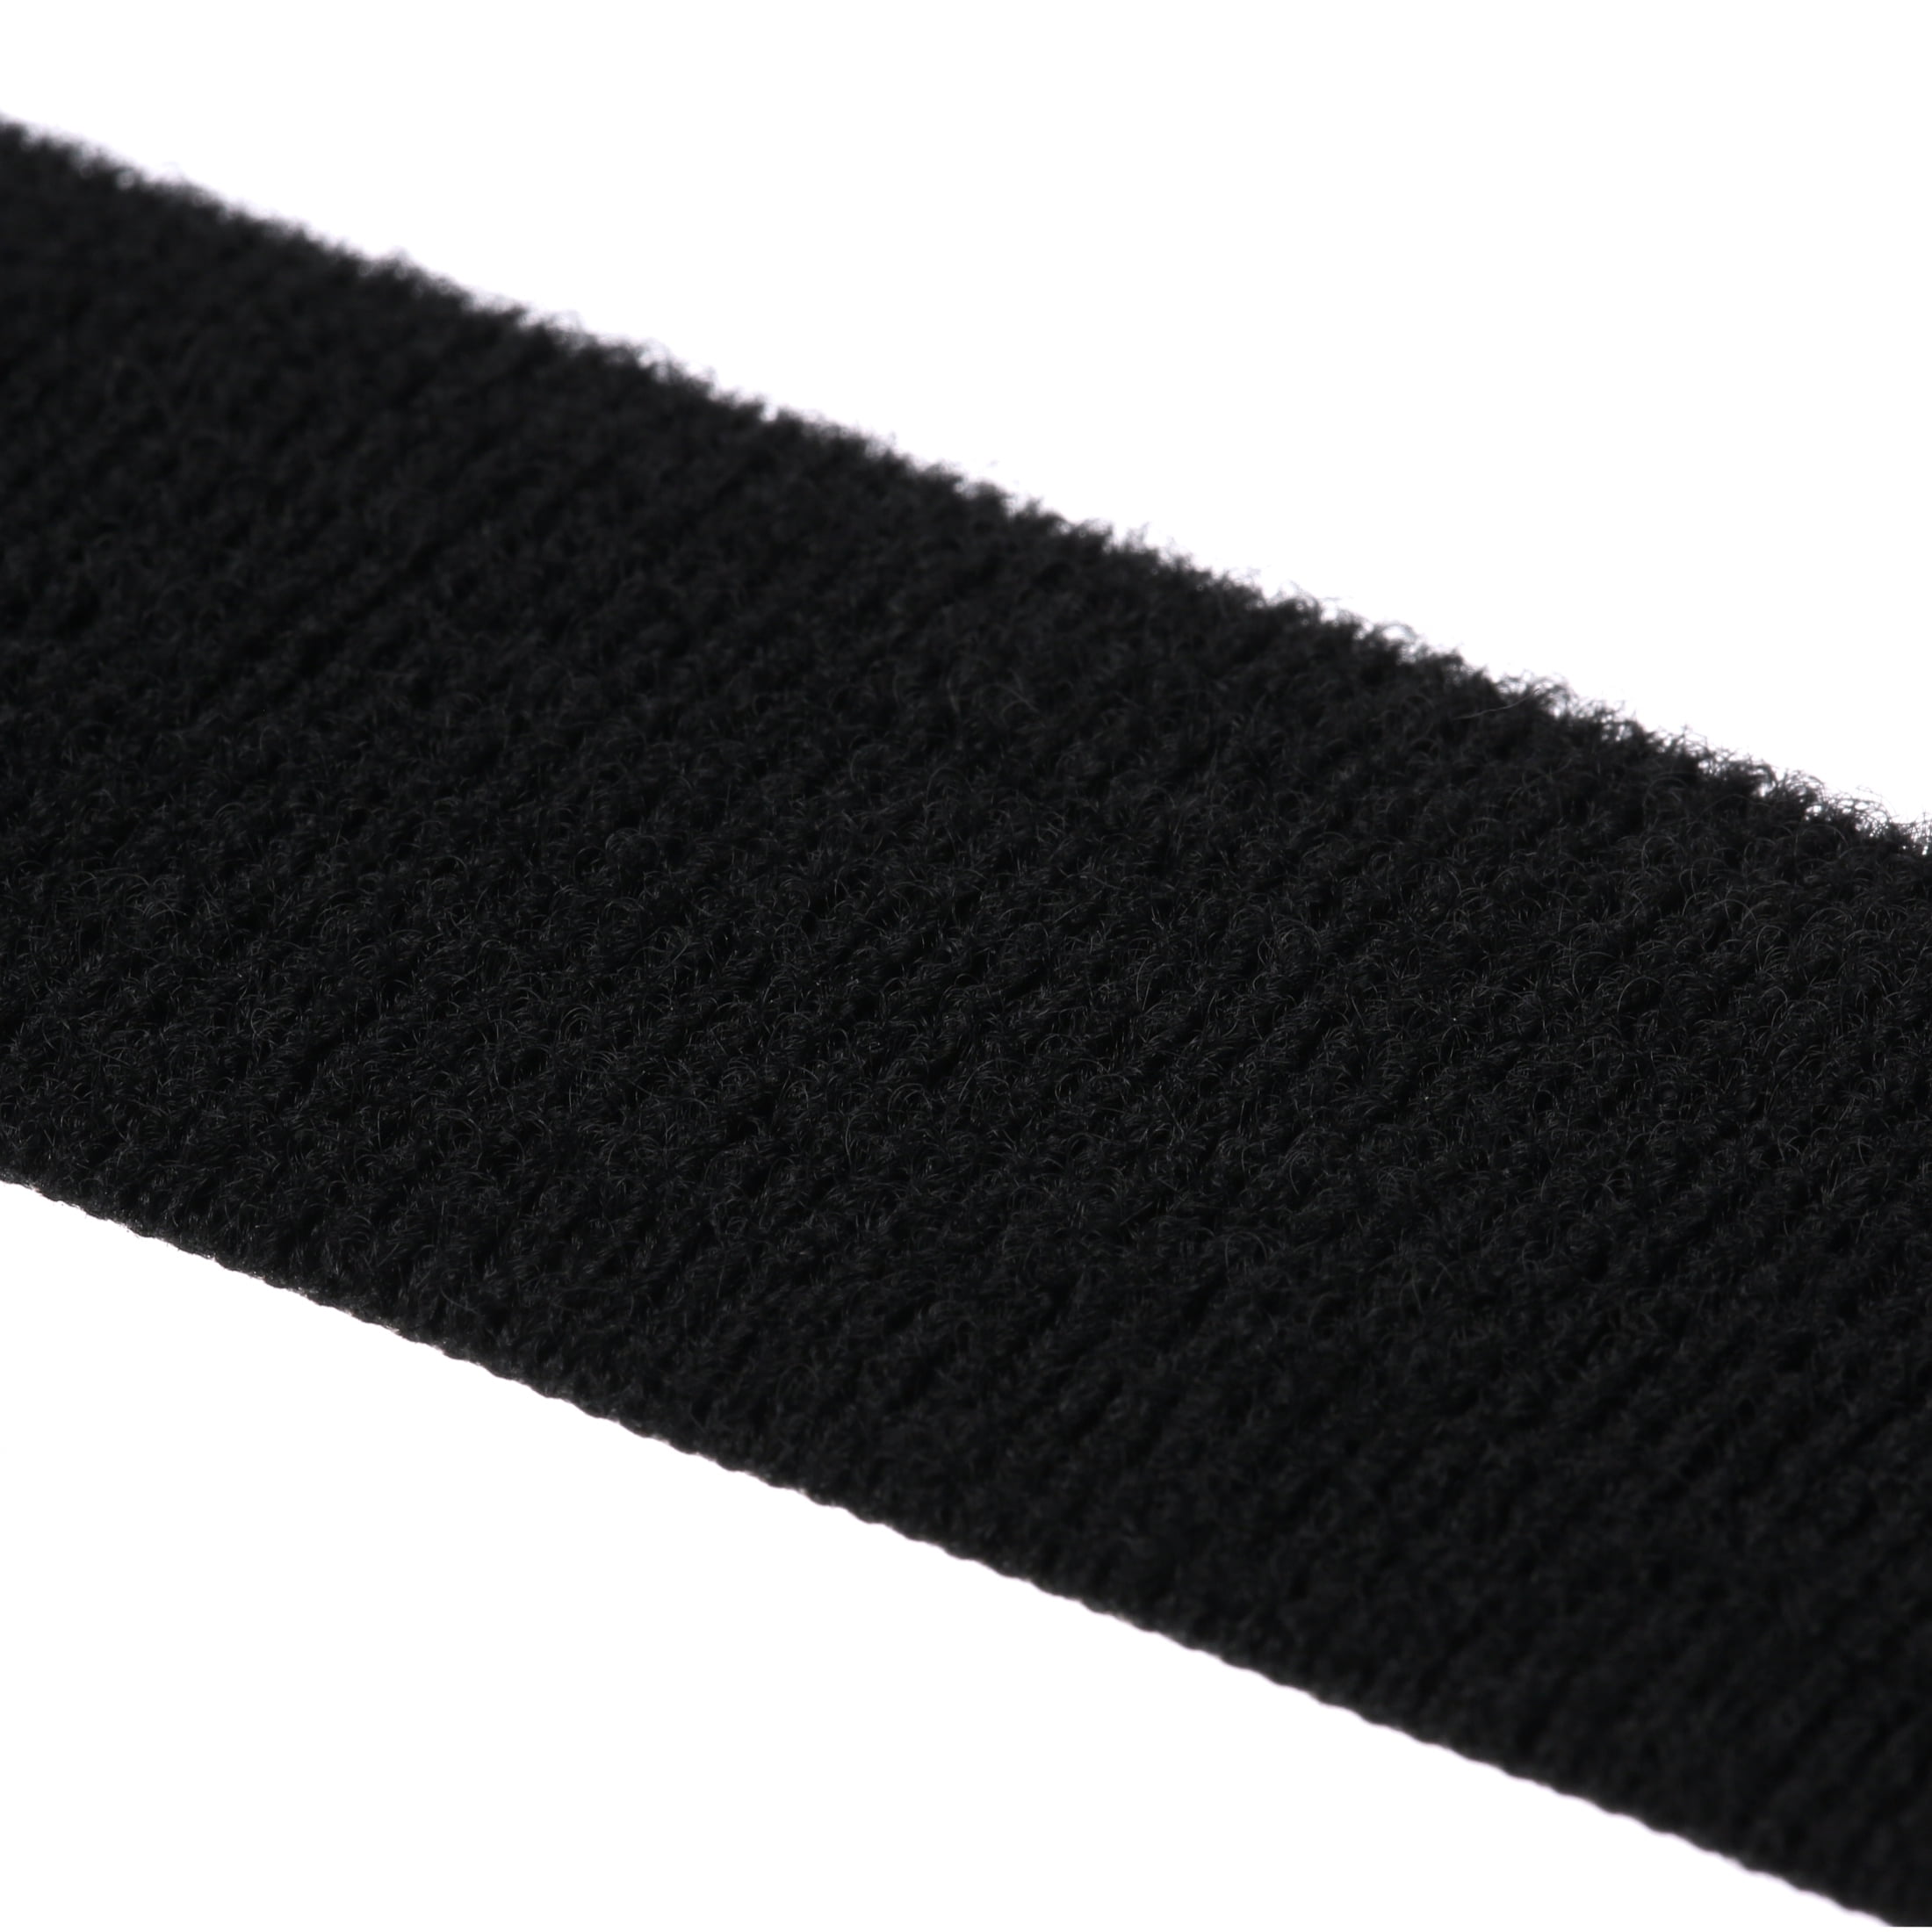 5/8 BLACK ONE-WRAP® TAPE  Full Line of VELCRO® Products from Textol  Systems